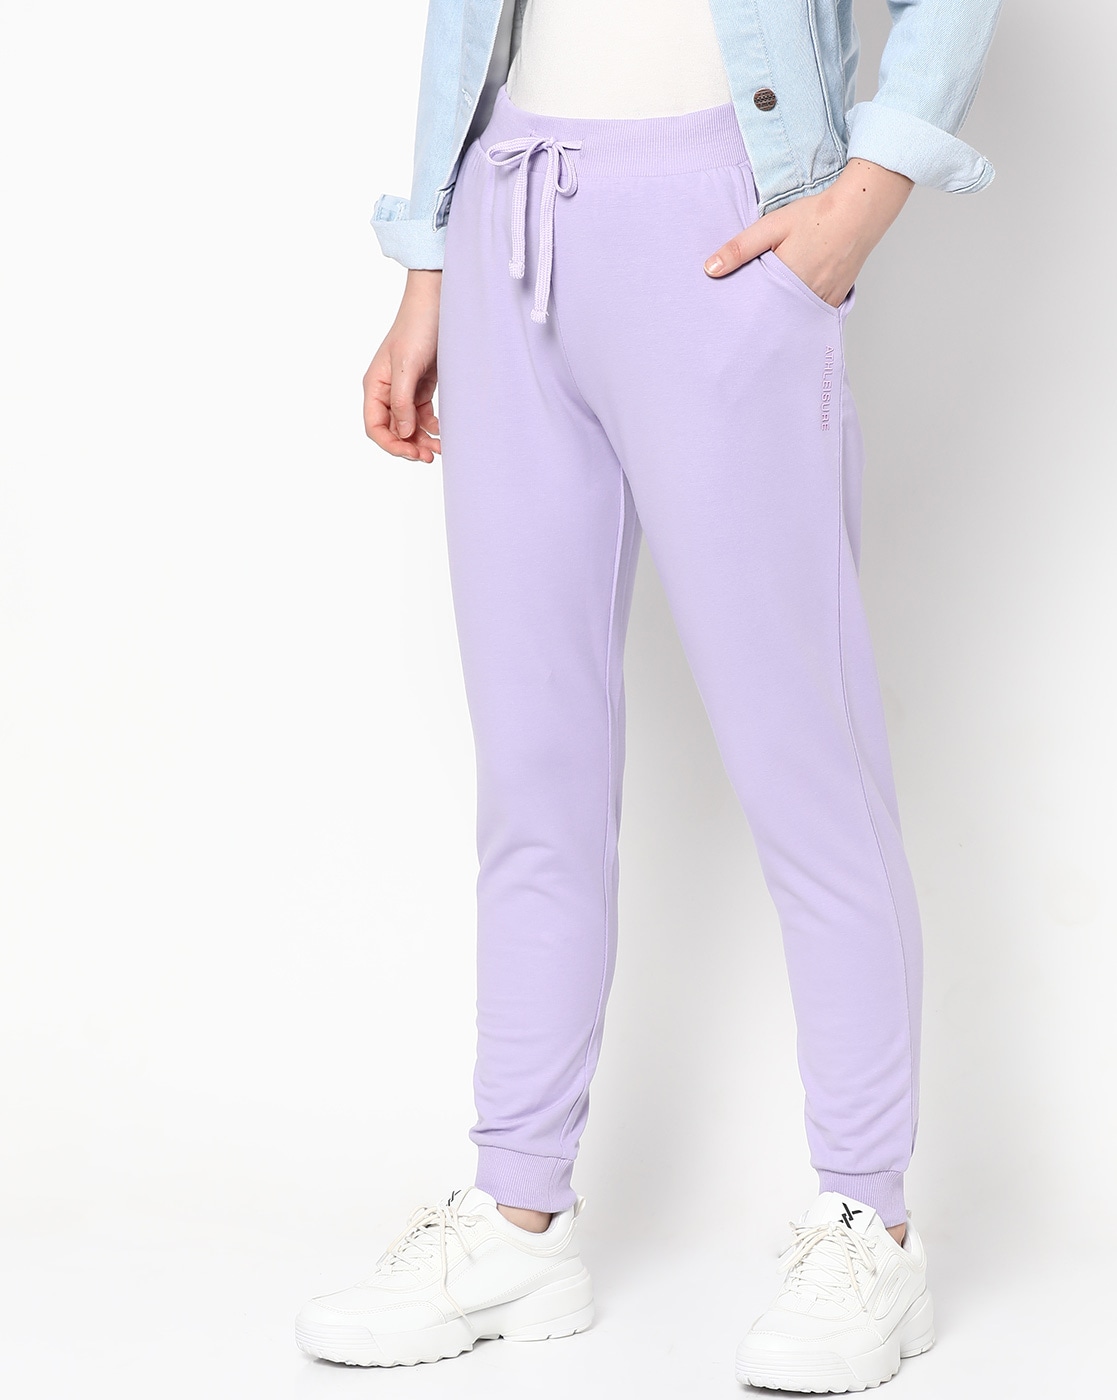 Joggers & Track Pants in the color purple for Women on sale